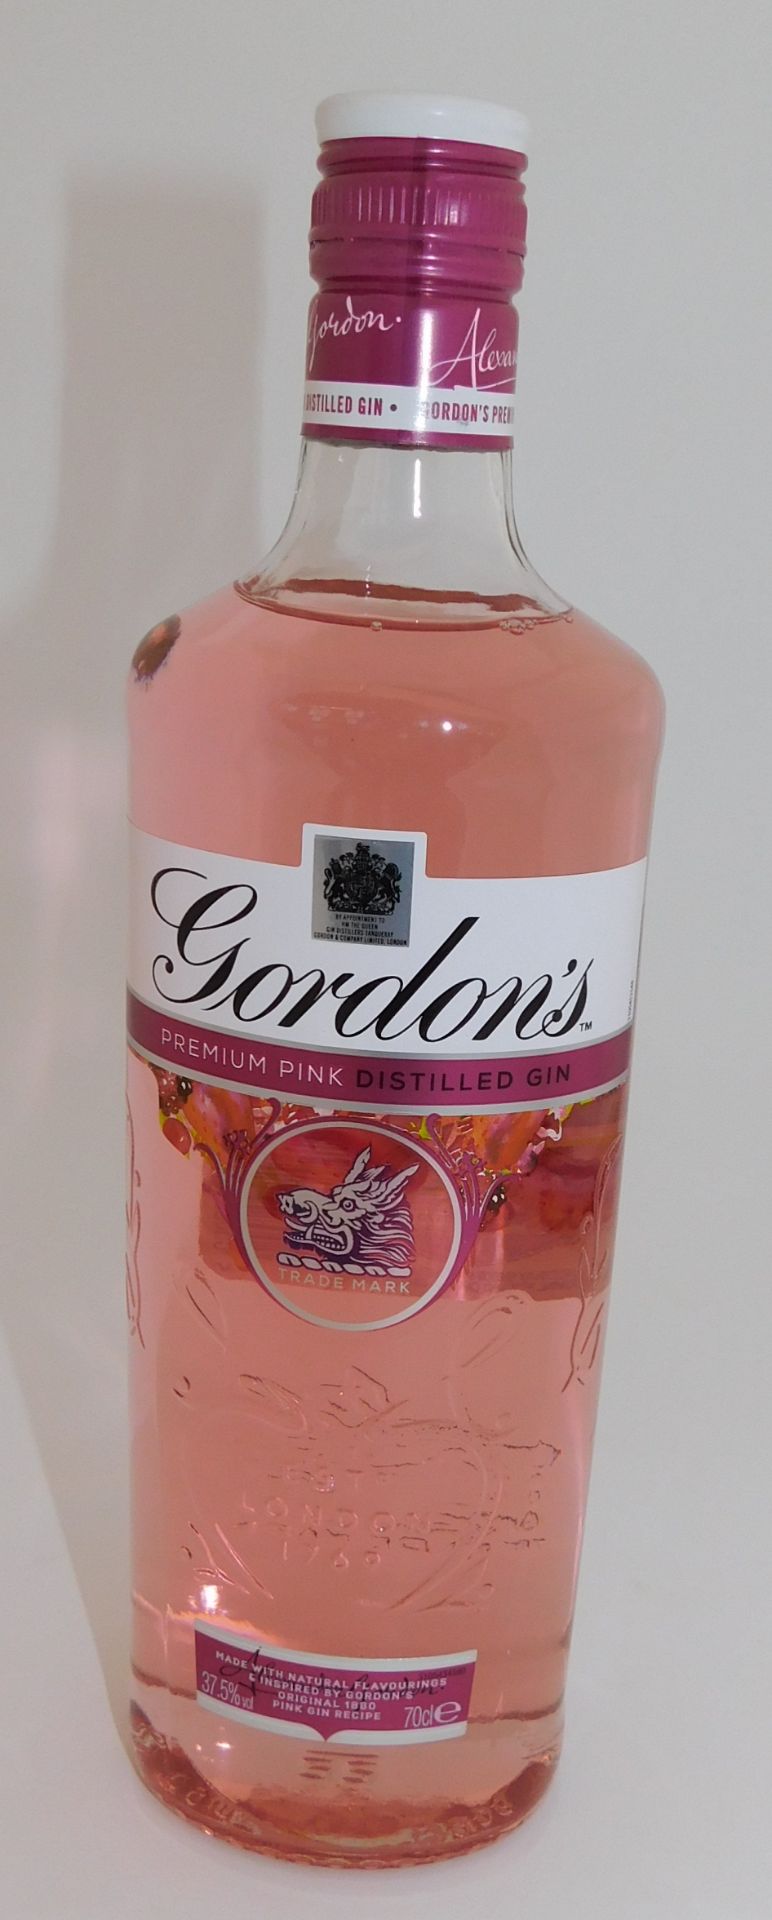 9 Bottles of Gordon’s Premium Pink Distilled Gin, 70cl (Located Stockport – See General Notes for